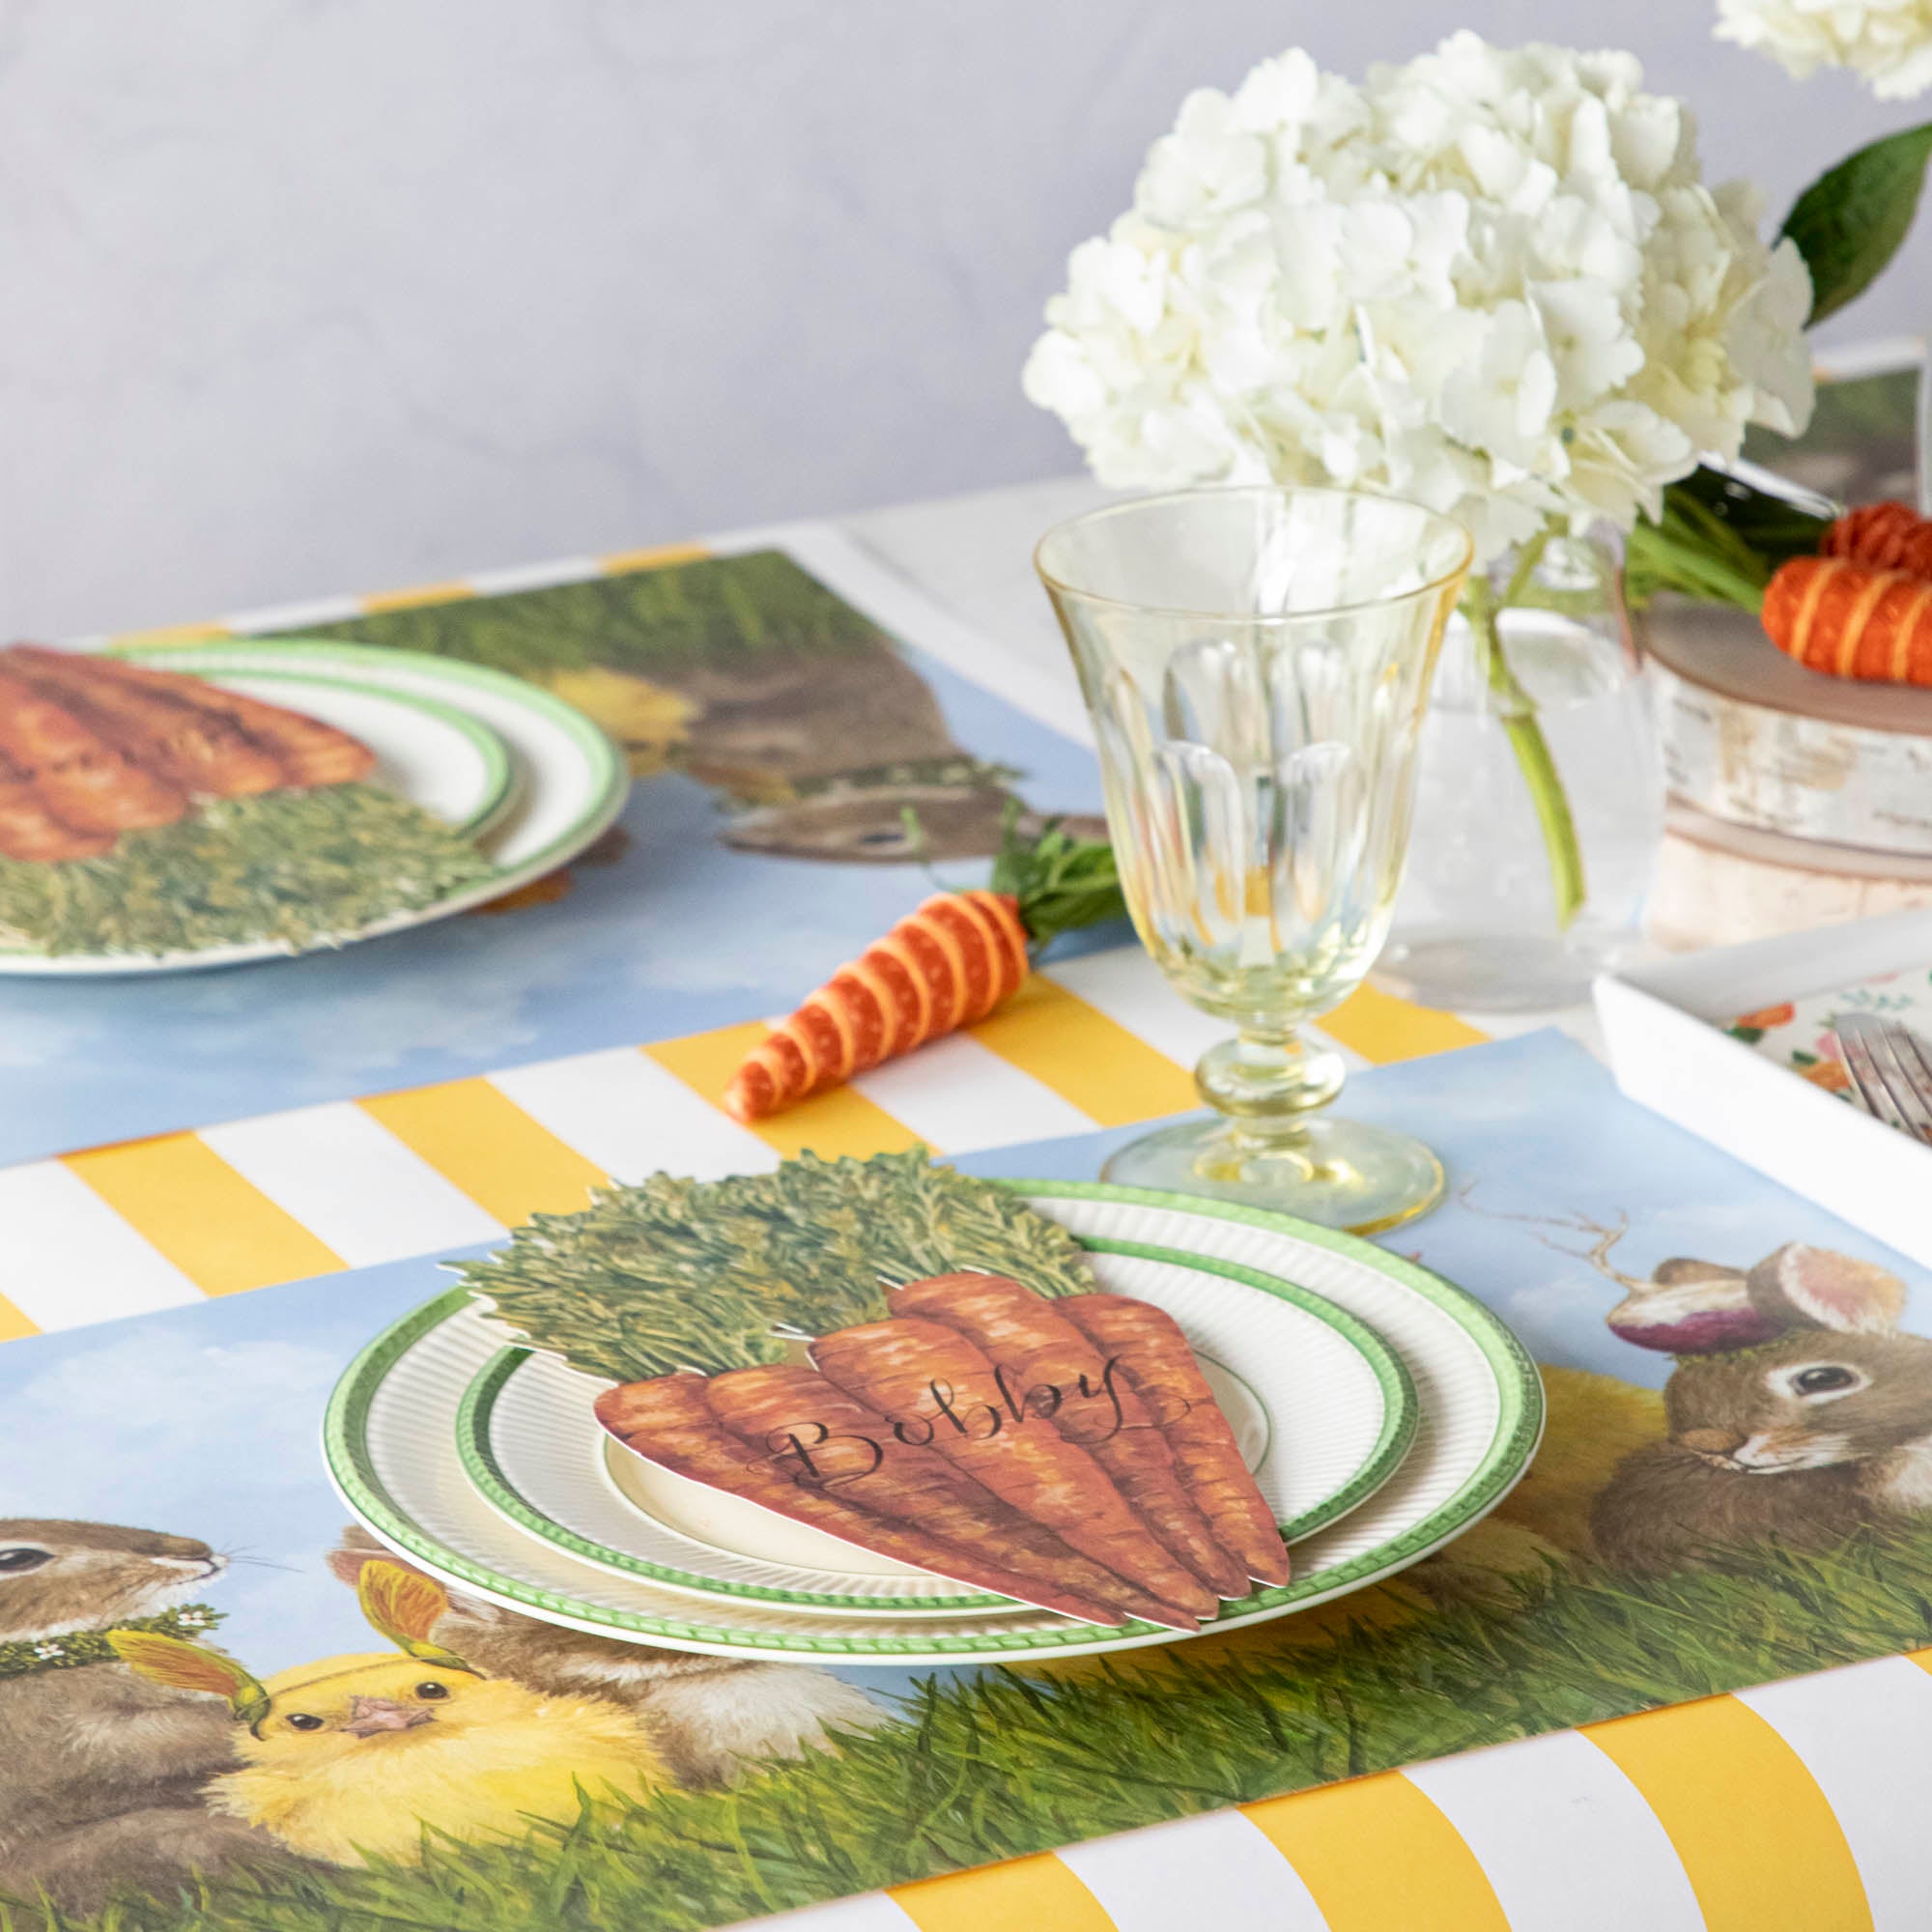 An elegant springtime table setting featuring Carrots Table Accents resting on each plate with names written on them in elegant script.